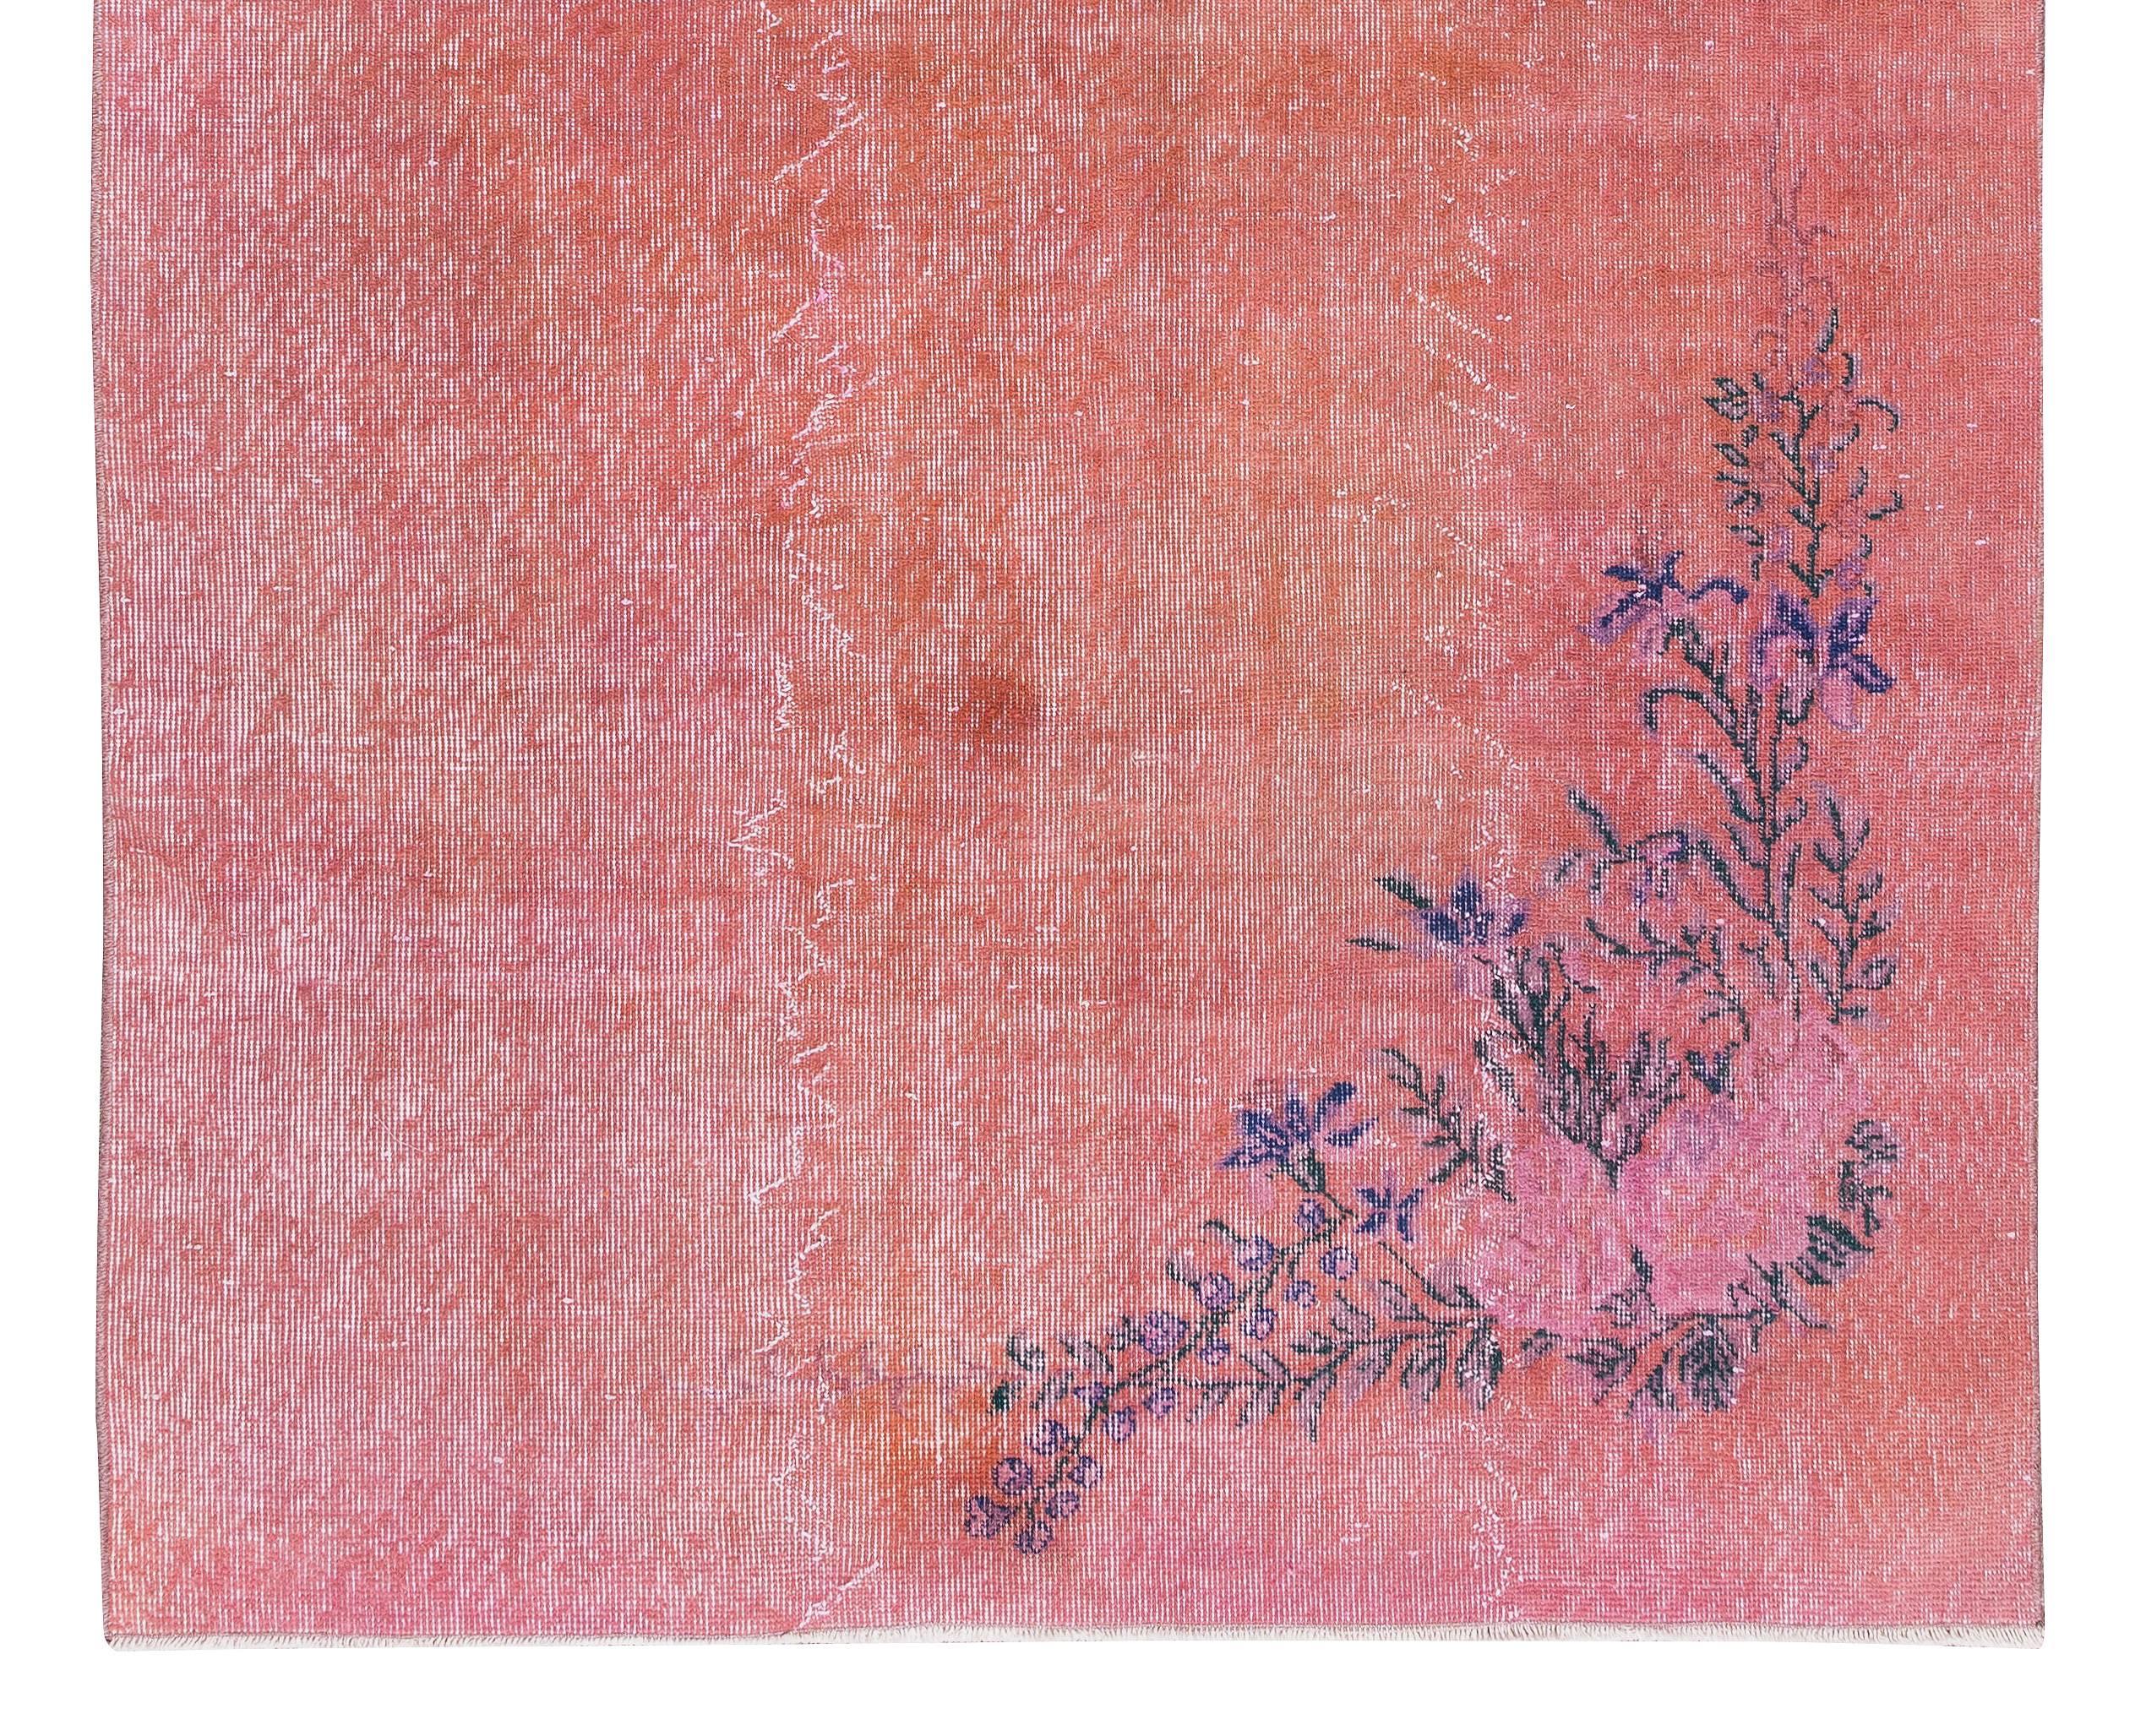 Hand-Woven 4.8x8 Ft Art Deco Chinese Rug Re-Dyed in Pink, Mid-Century Handmade Wool Carpet